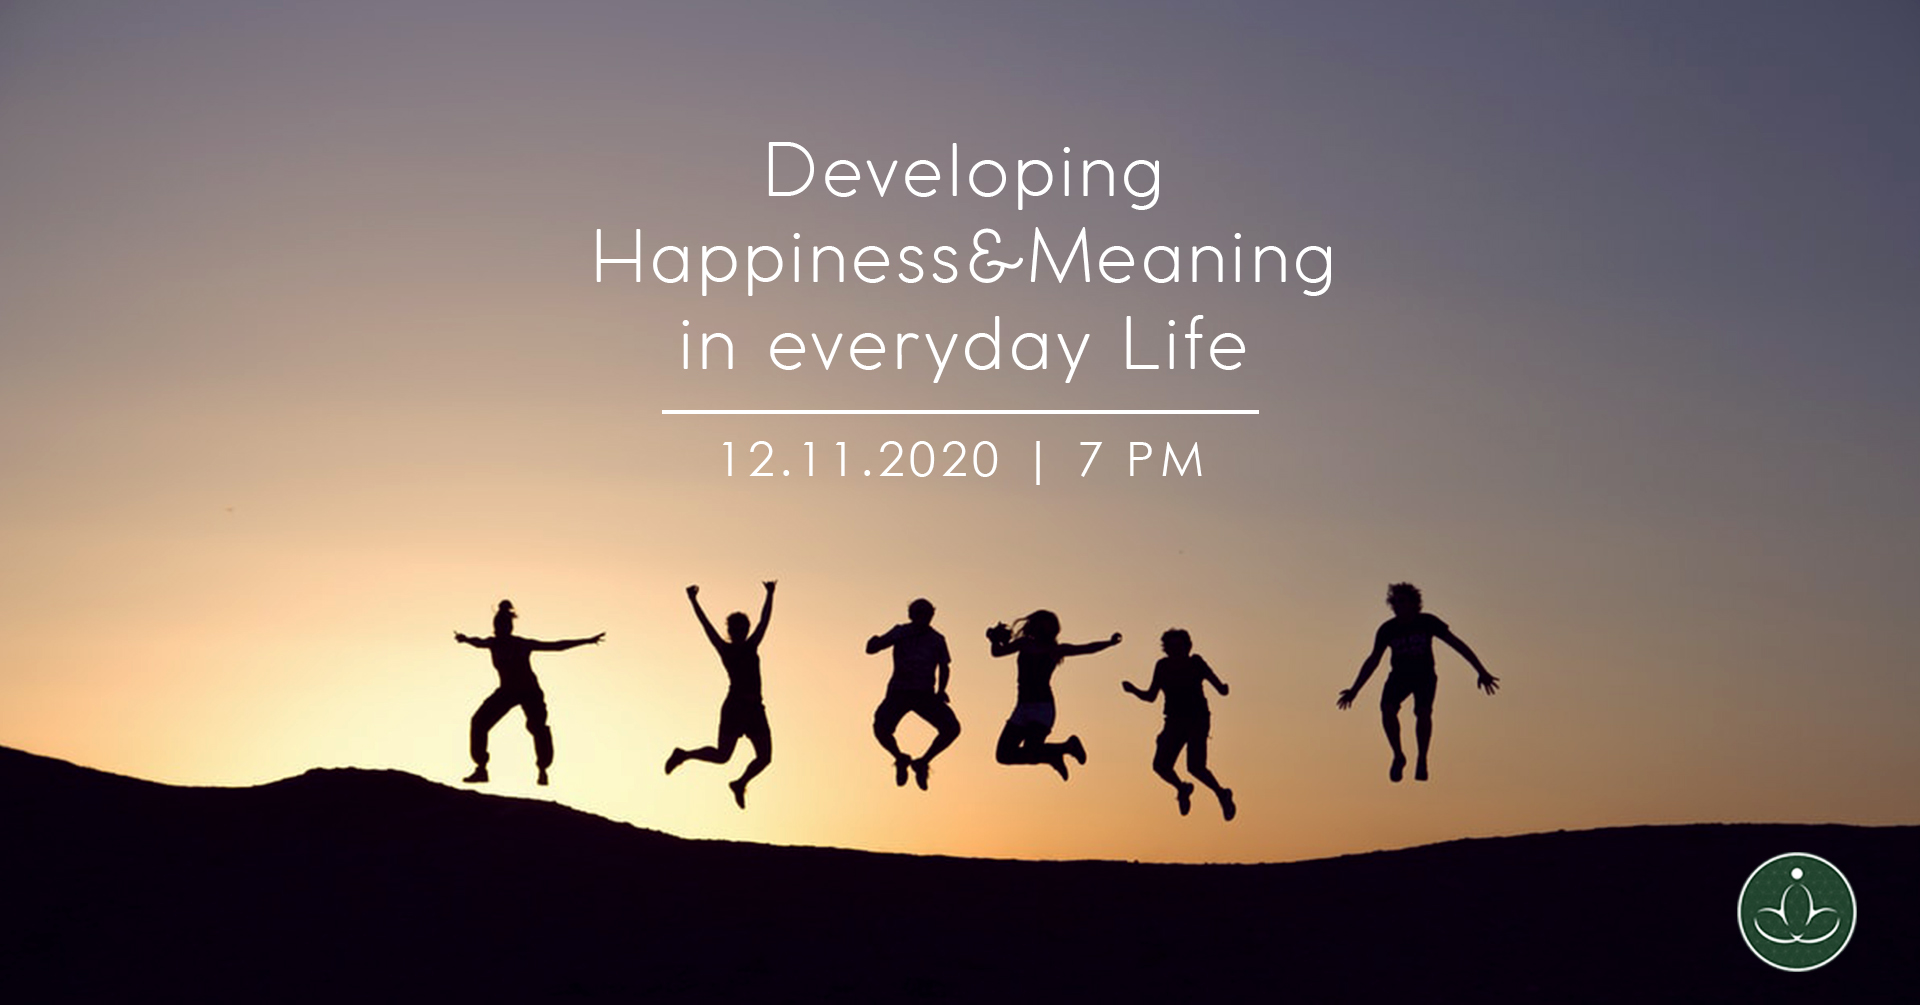 Developing Happiness & Meaning in Everyday Life